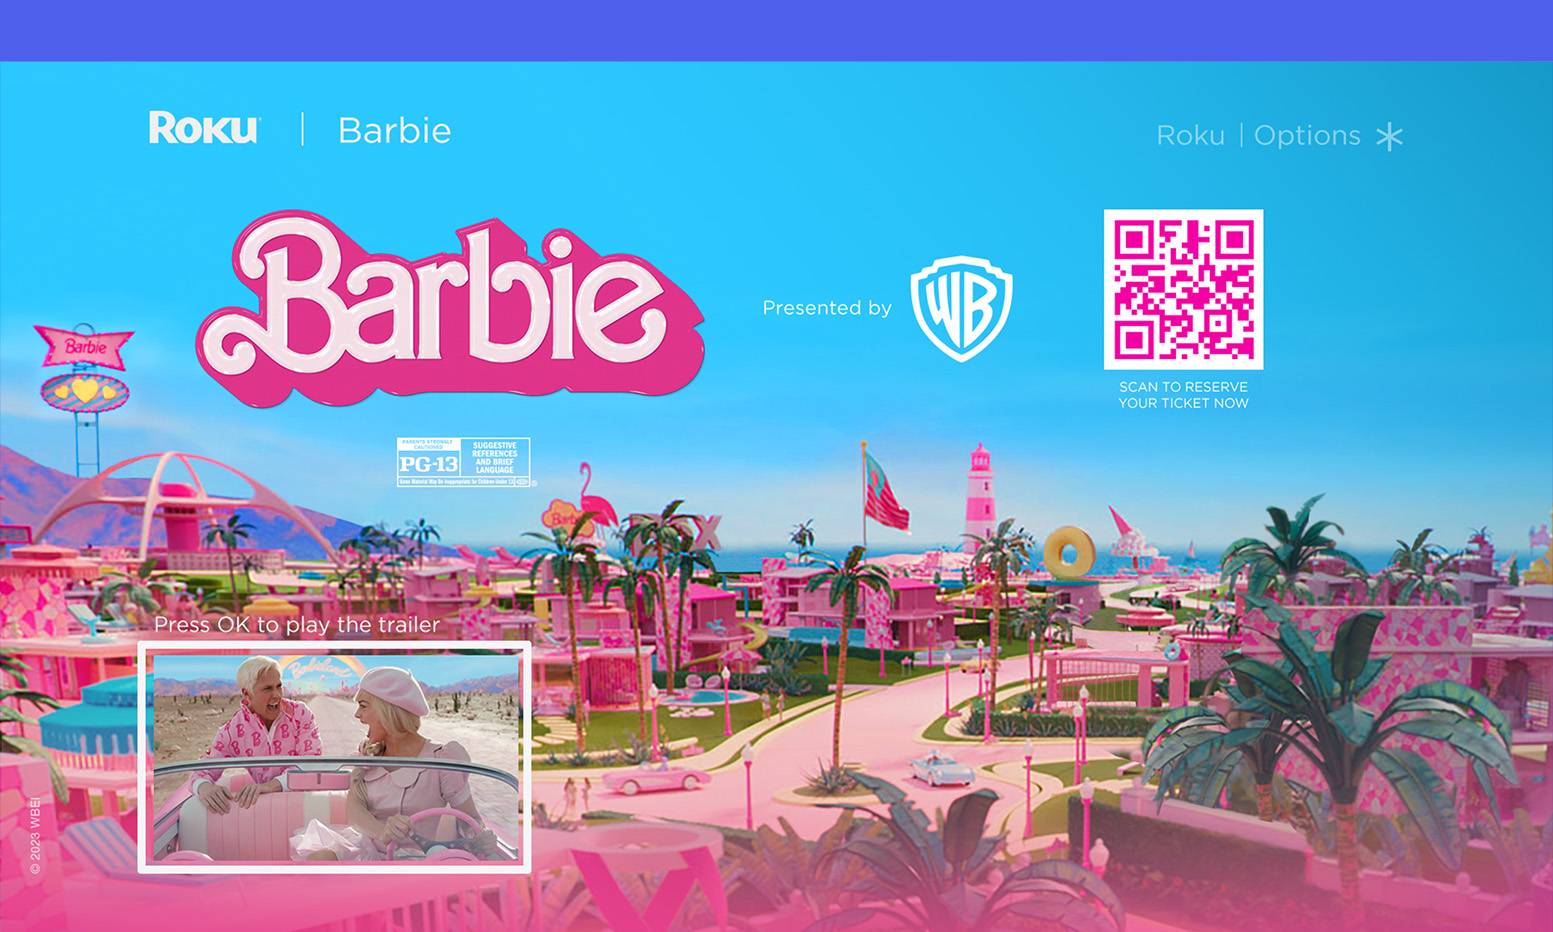 Barbie Marketing: Research on Trending Keywords and Content Marketing